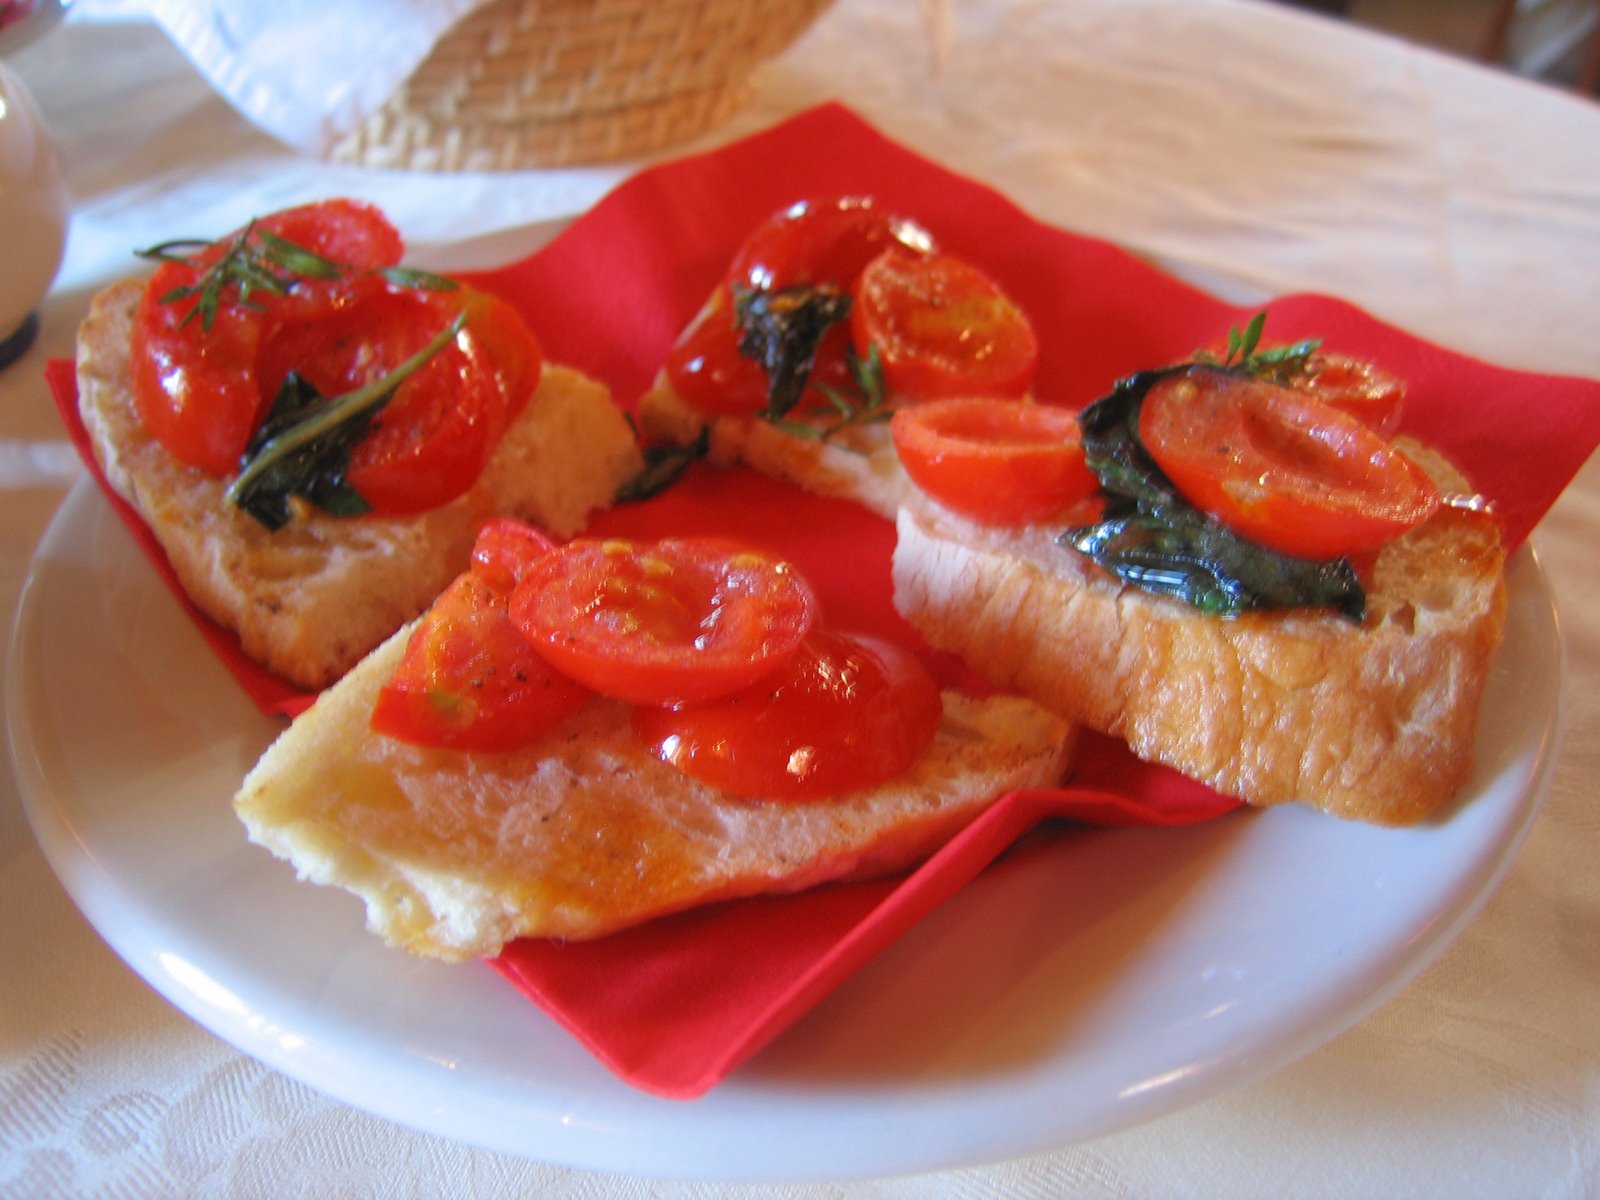 [Tomato+with+bread,+breakfast+at+Country+House+Montali+(bit+blurry).jpg]